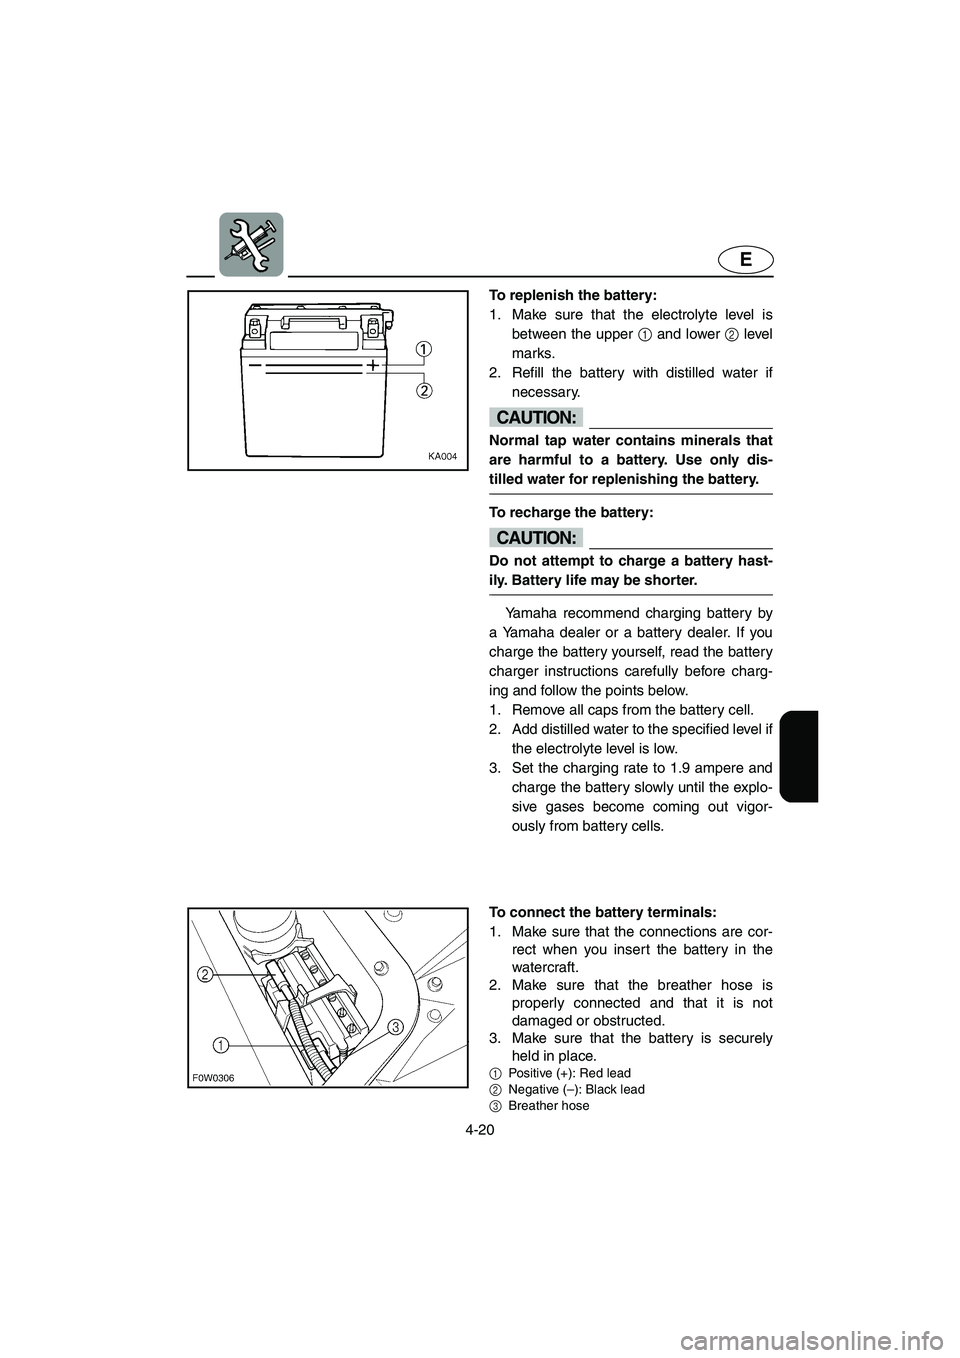 YAMAHA GP800R 2002  Owners Manual 4-20
E
To replenish the battery: 
1. Make sure that the electrolyte level is
between the upper 1 and lower 2 level
marks. 
2. Refill the battery with distilled water if
necessary. 
CAUTION:@ Normal ta